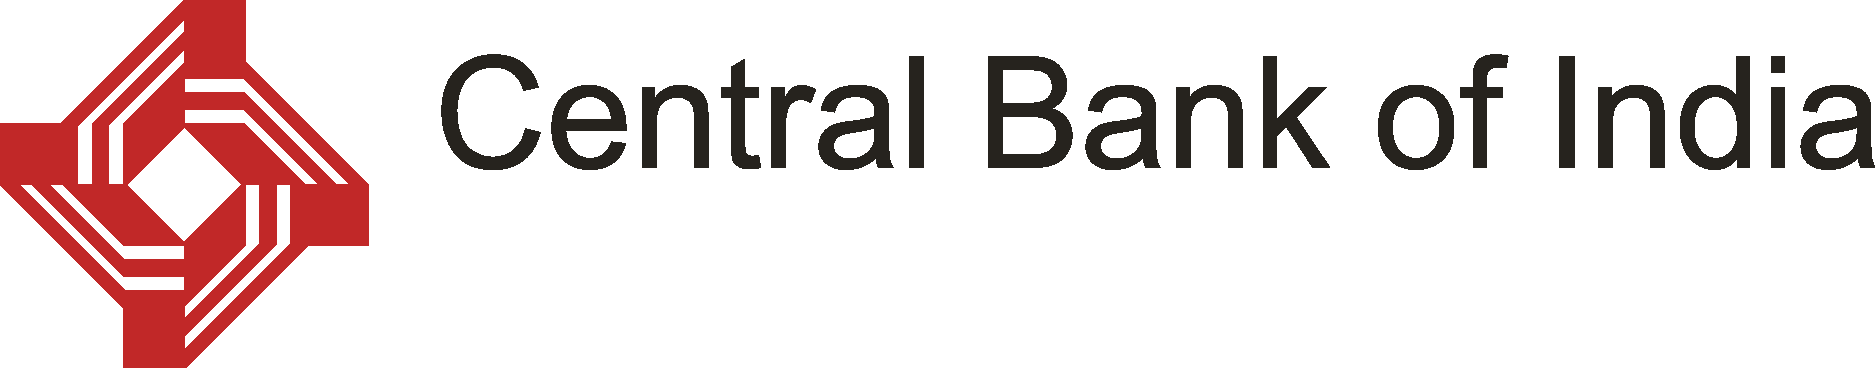 Central bank of india - Bank - Ambala Cantt - Haryana | Yappe.in